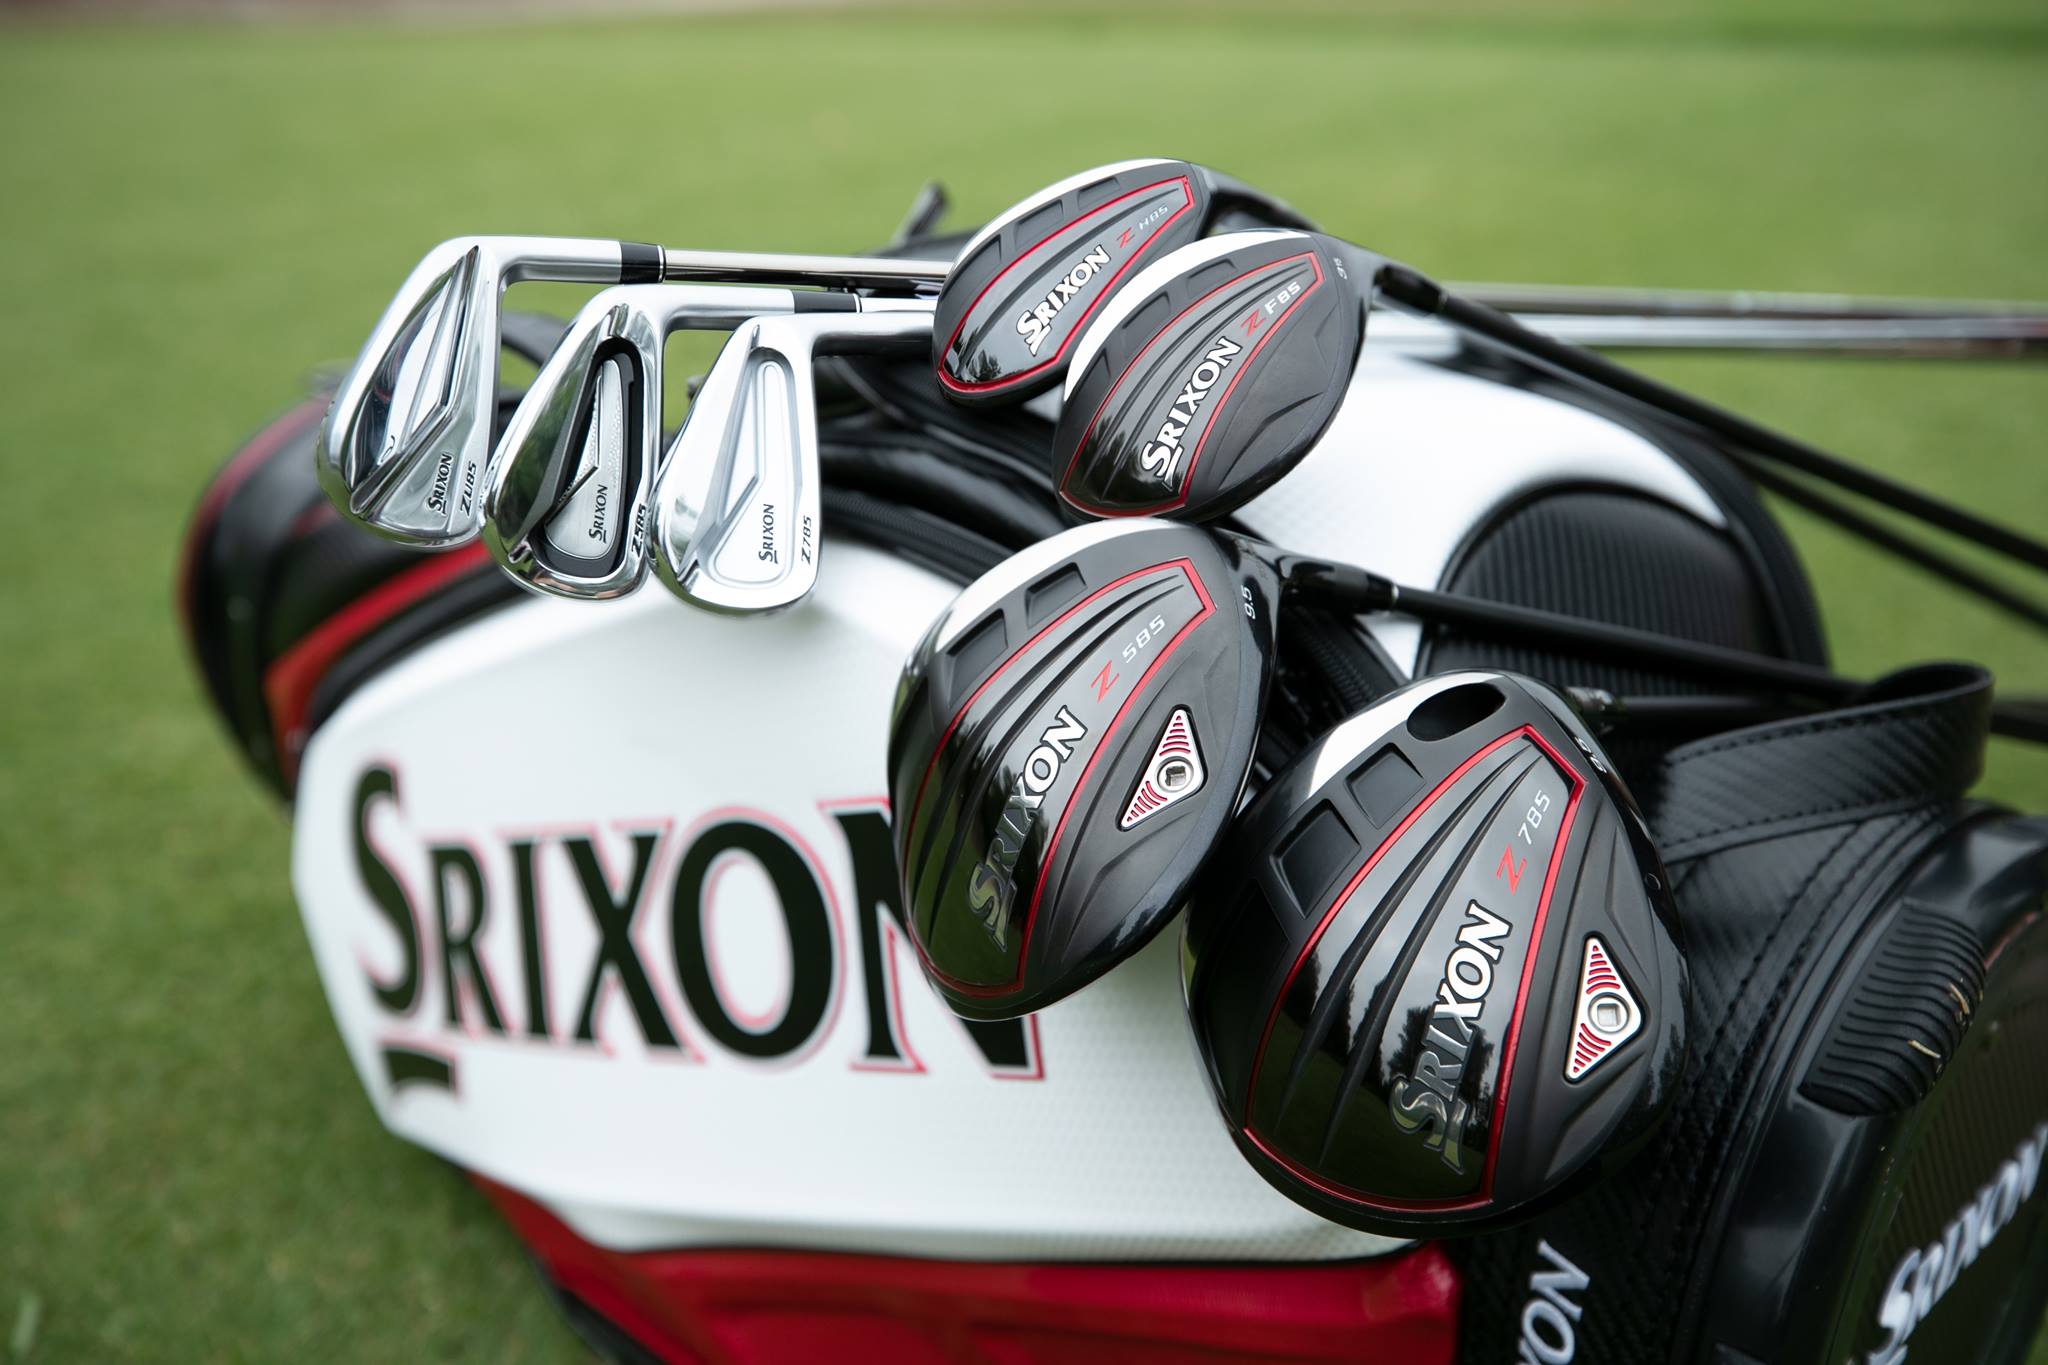 Srixon Golf Ball Fitting at Cog Hill Golf and Country Club - May